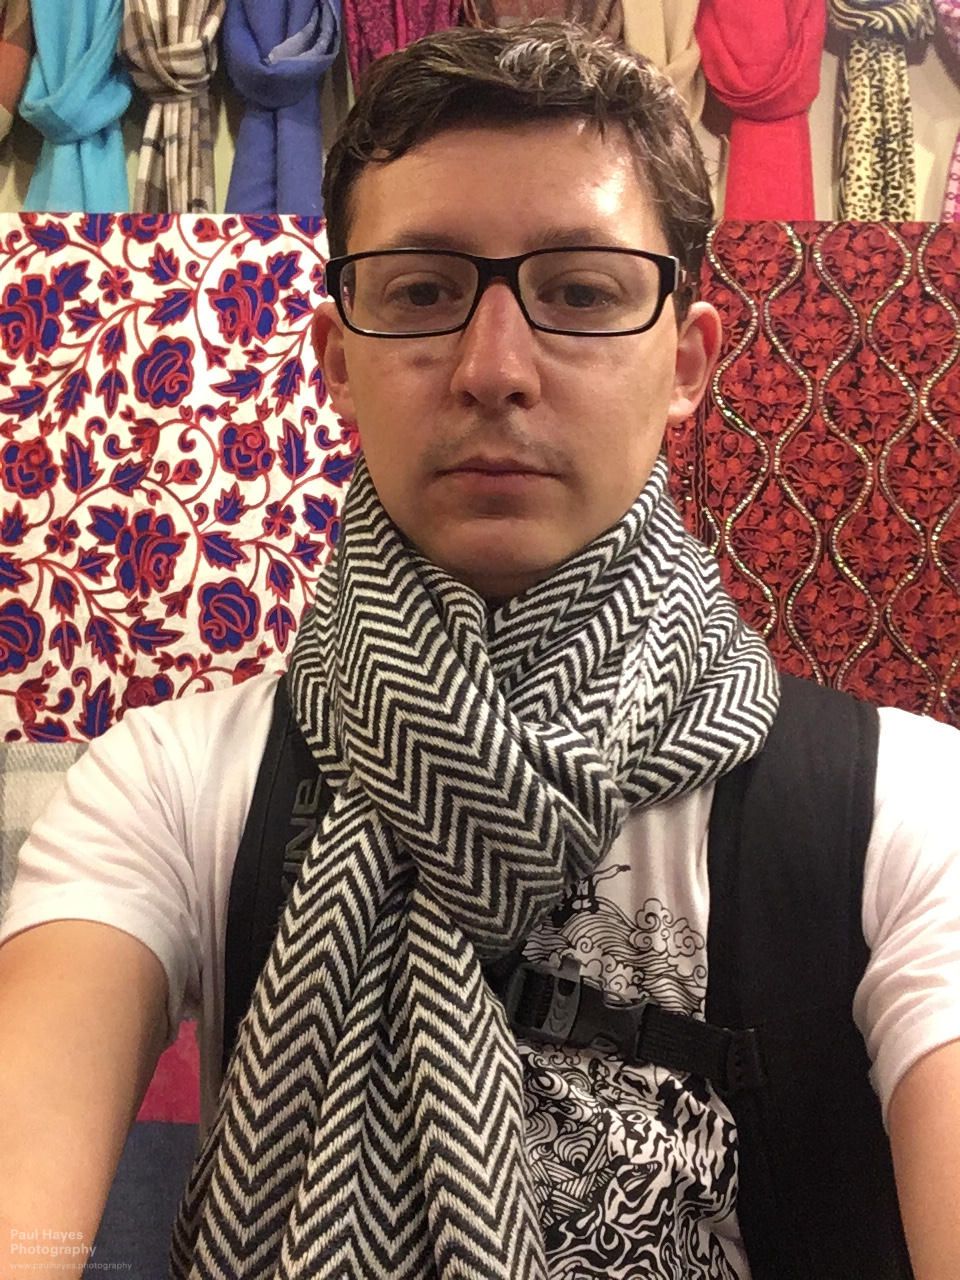 Paul trying on scarves